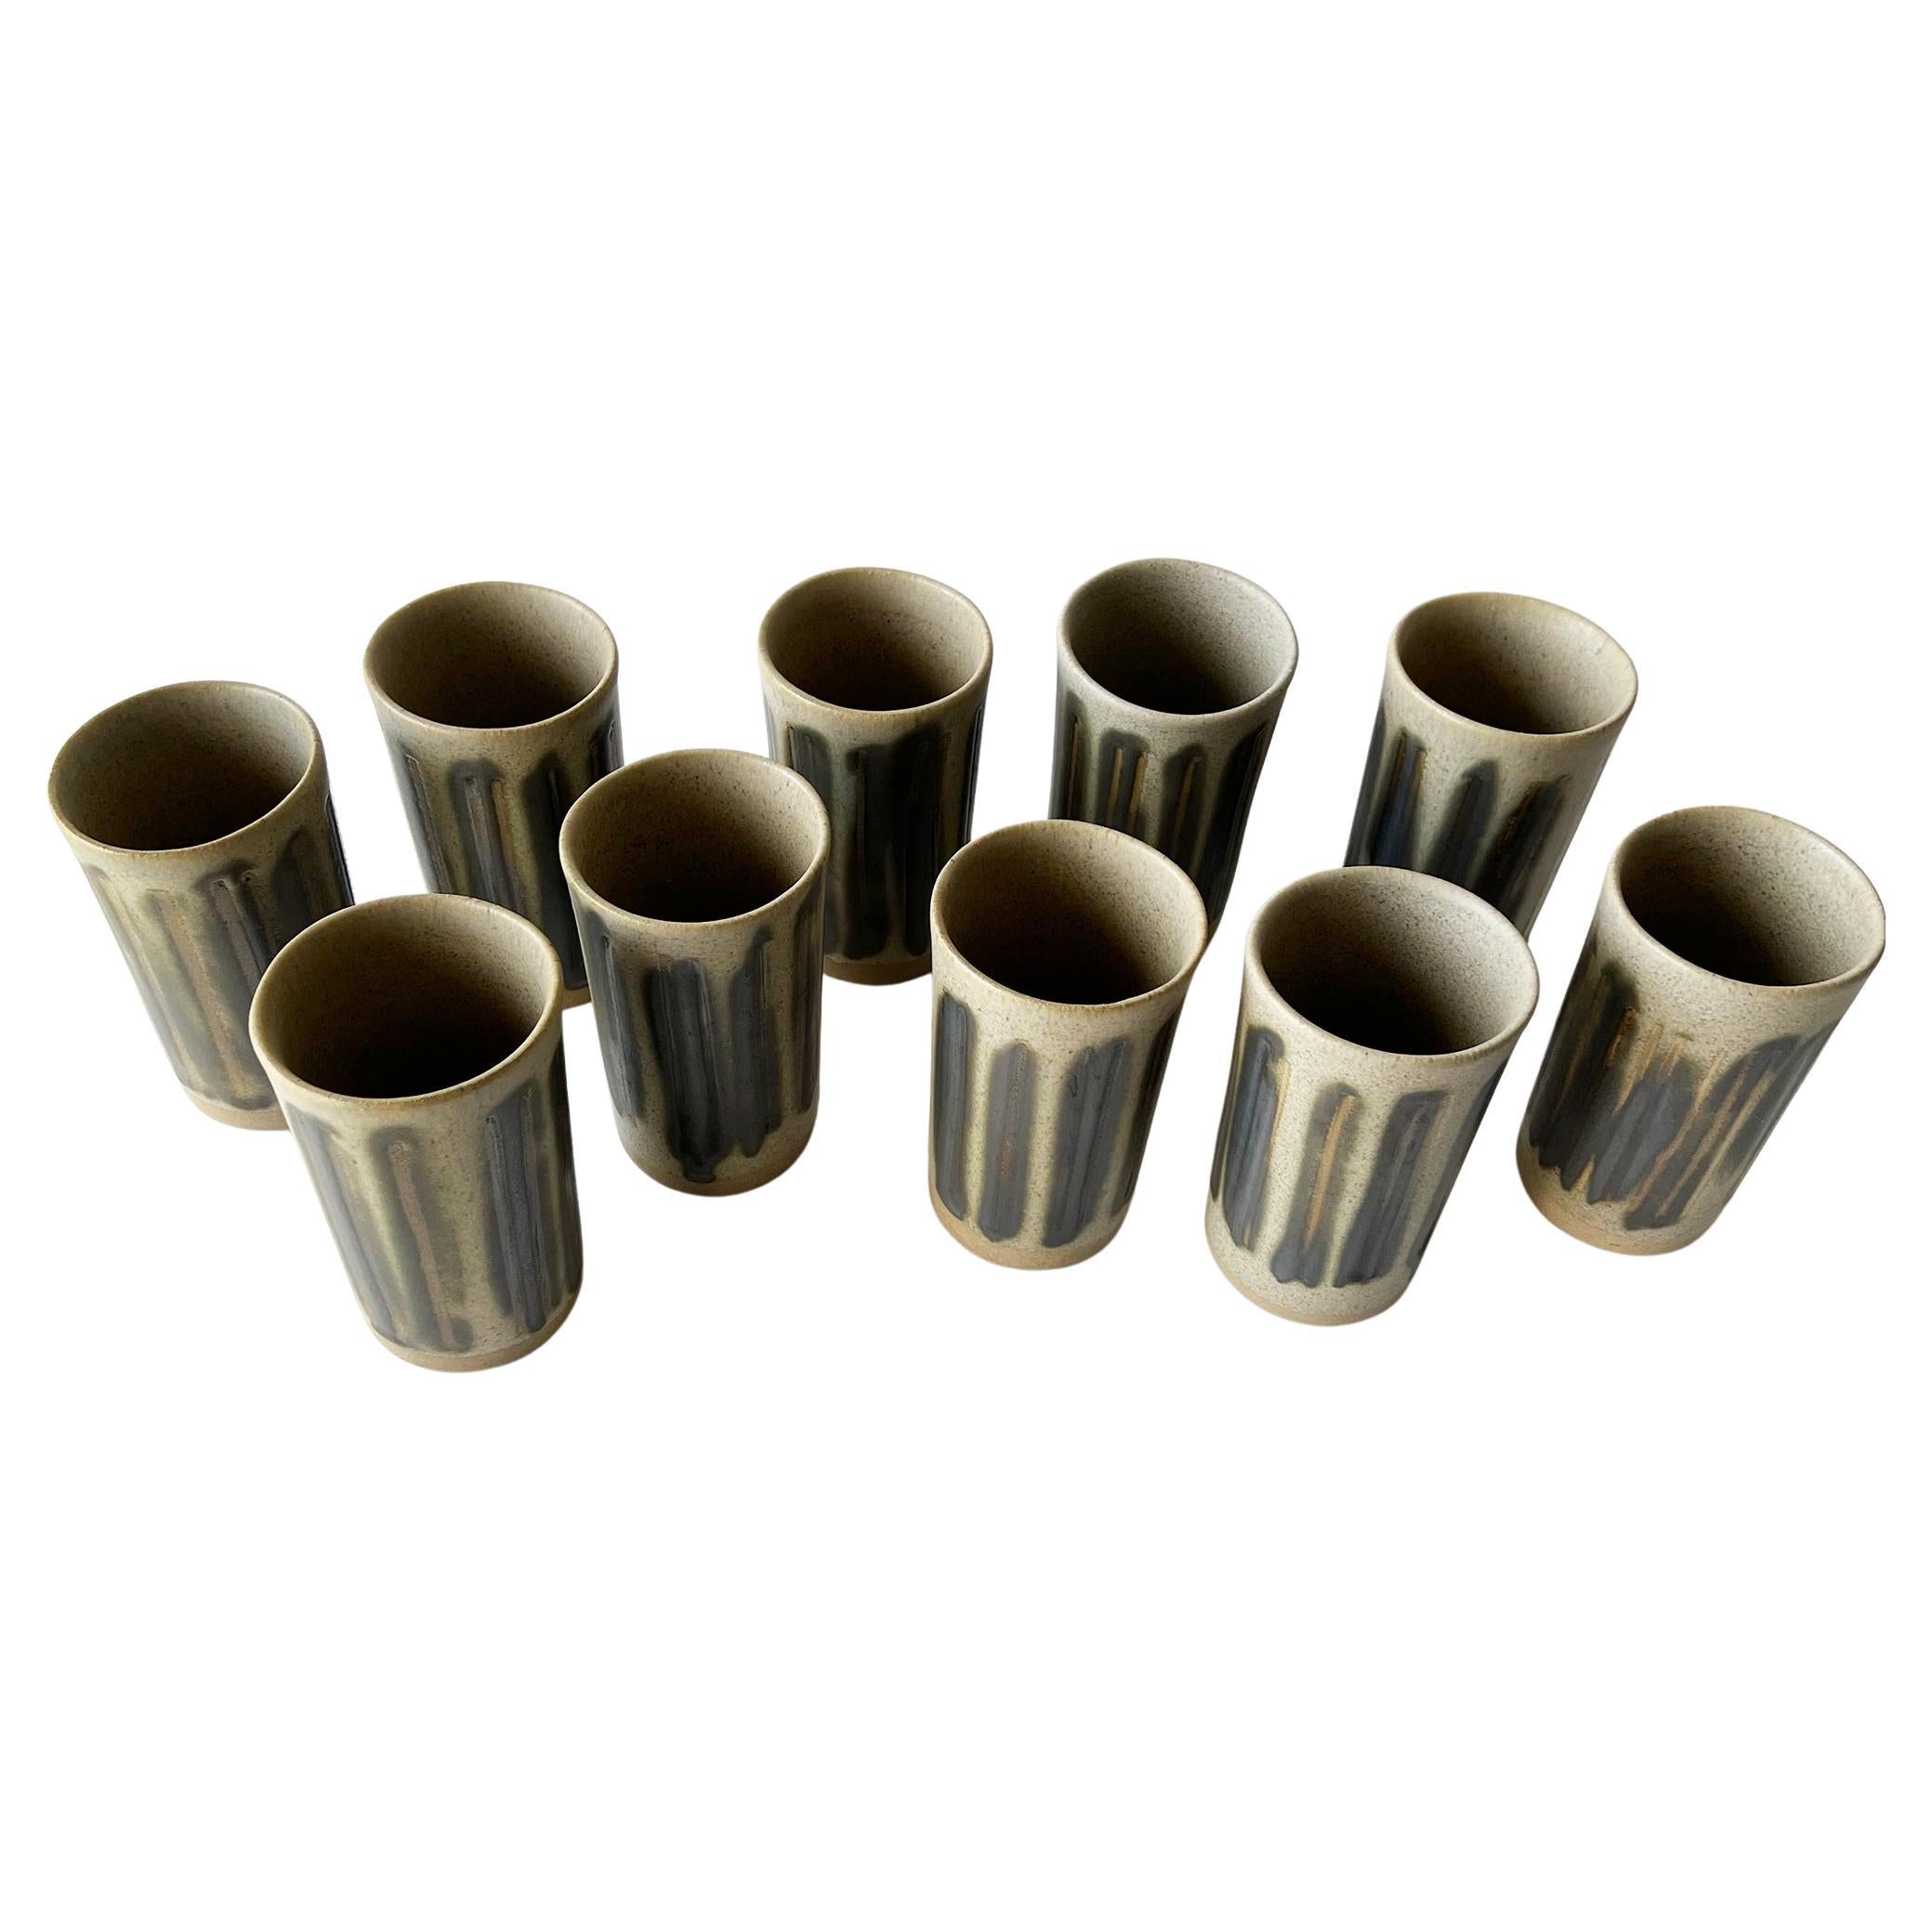 Rare set of 10 stoneware tumblers created by Gordon and Jane Martz. They measure 5 5/8